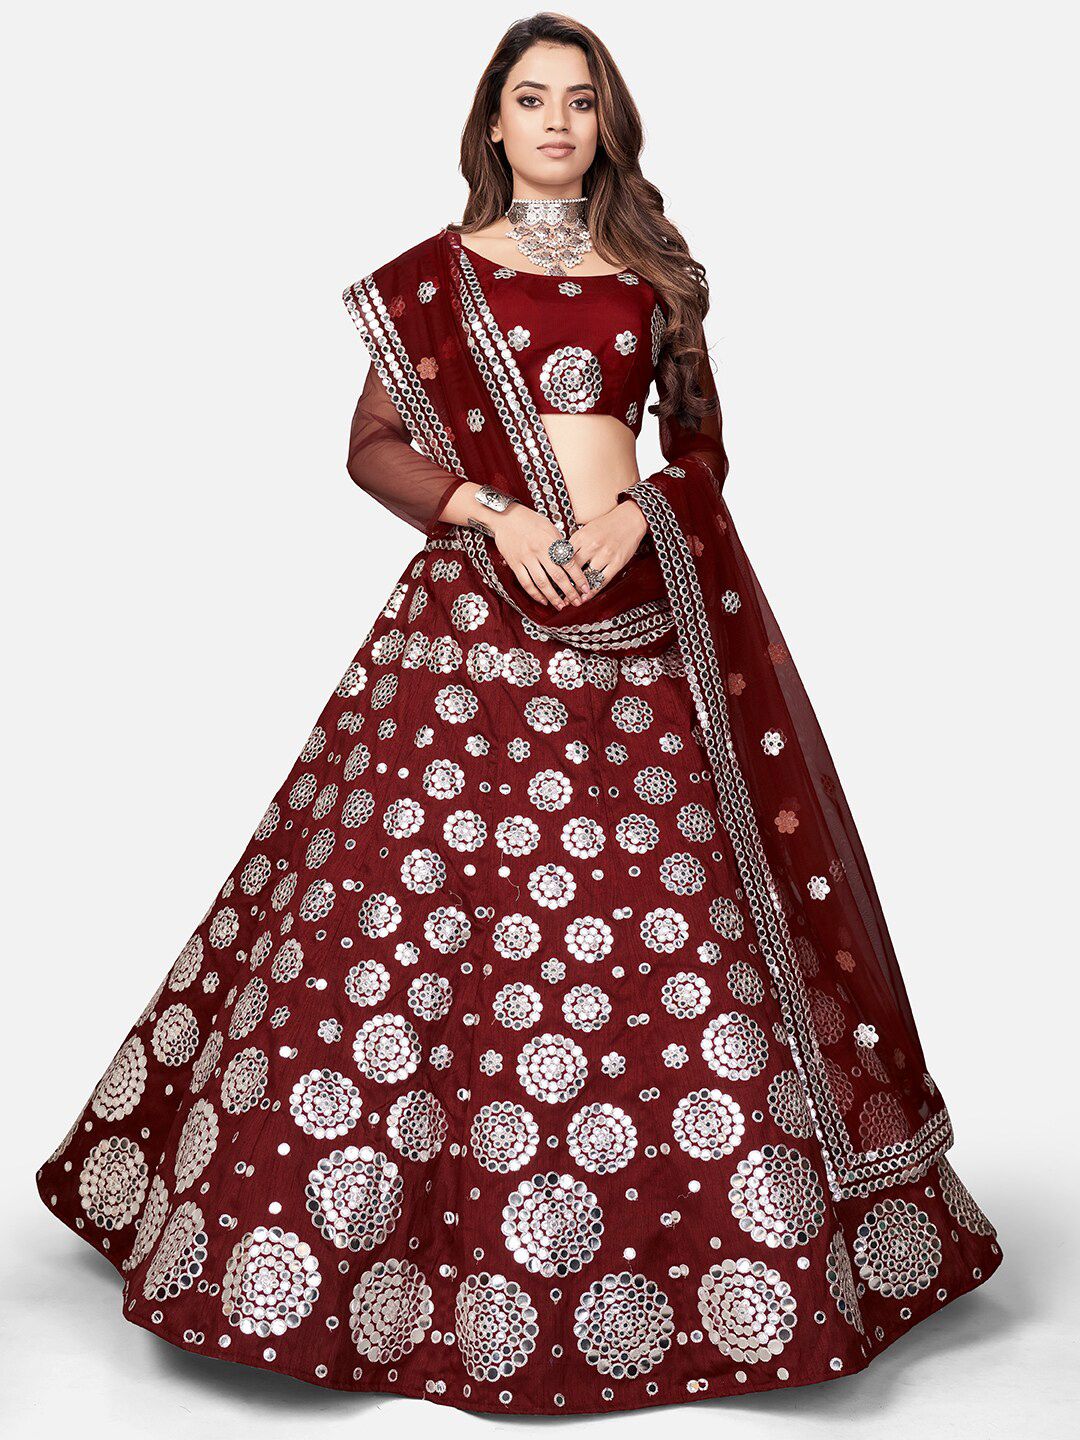 WHITE FIRE Maroon & White Embellished Thread Work Semi-Stitched Lehenga & Unstitched Blouse With Dupatta Price in India